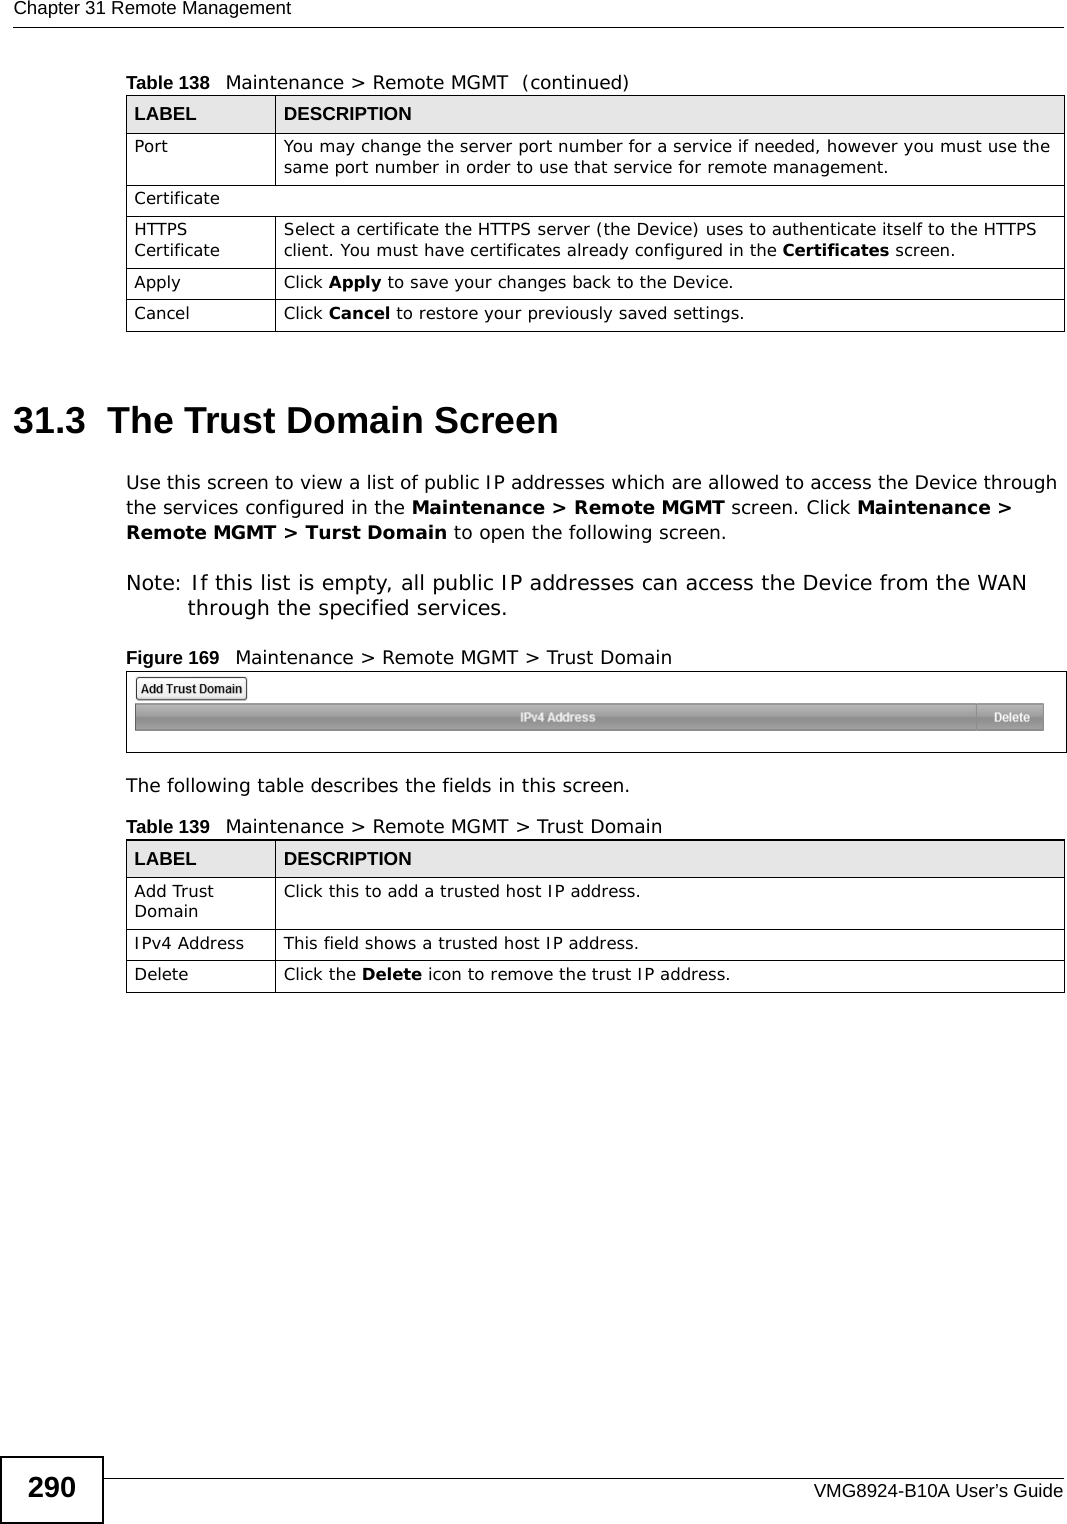 Chapter 31 Remote ManagementVMG8924-B10A User’s Guide29031.3  The Trust Domain ScreenUse this screen to view a list of public IP addresses which are allowed to access the Device through the services configured in the Maintenance &gt; Remote MGMT screen. Click Maintenance &gt; Remote MGMT &gt; Turst Domain to open the following screen. Note: If this list is empty, all public IP addresses can access the Device from the WAN through the specified services.Figure 169   Maintenance &gt; Remote MGMT &gt; Trust Domain The following table describes the fields in this screen. Port You may change the server port number for a service if needed, however you must use the same port number in order to use that service for remote management.CertificateHTTPS Certificate Select a certificate the HTTPS server (the Device) uses to authenticate itself to the HTTPS client. You must have certificates already configured in the Certificates screen.Apply Click Apply to save your changes back to the Device.Cancel Click Cancel to restore your previously saved settings.Table 138   Maintenance &gt; Remote MGMT  (continued)LABEL DESCRIPTIONTable 139   Maintenance &gt; Remote MGMT &gt; Trust Domain LABEL DESCRIPTIONAdd Trust Domain Click this to add a trusted host IP address.IPv4 Address This field shows a trusted host IP address.Delete Click the Delete icon to remove the trust IP address.